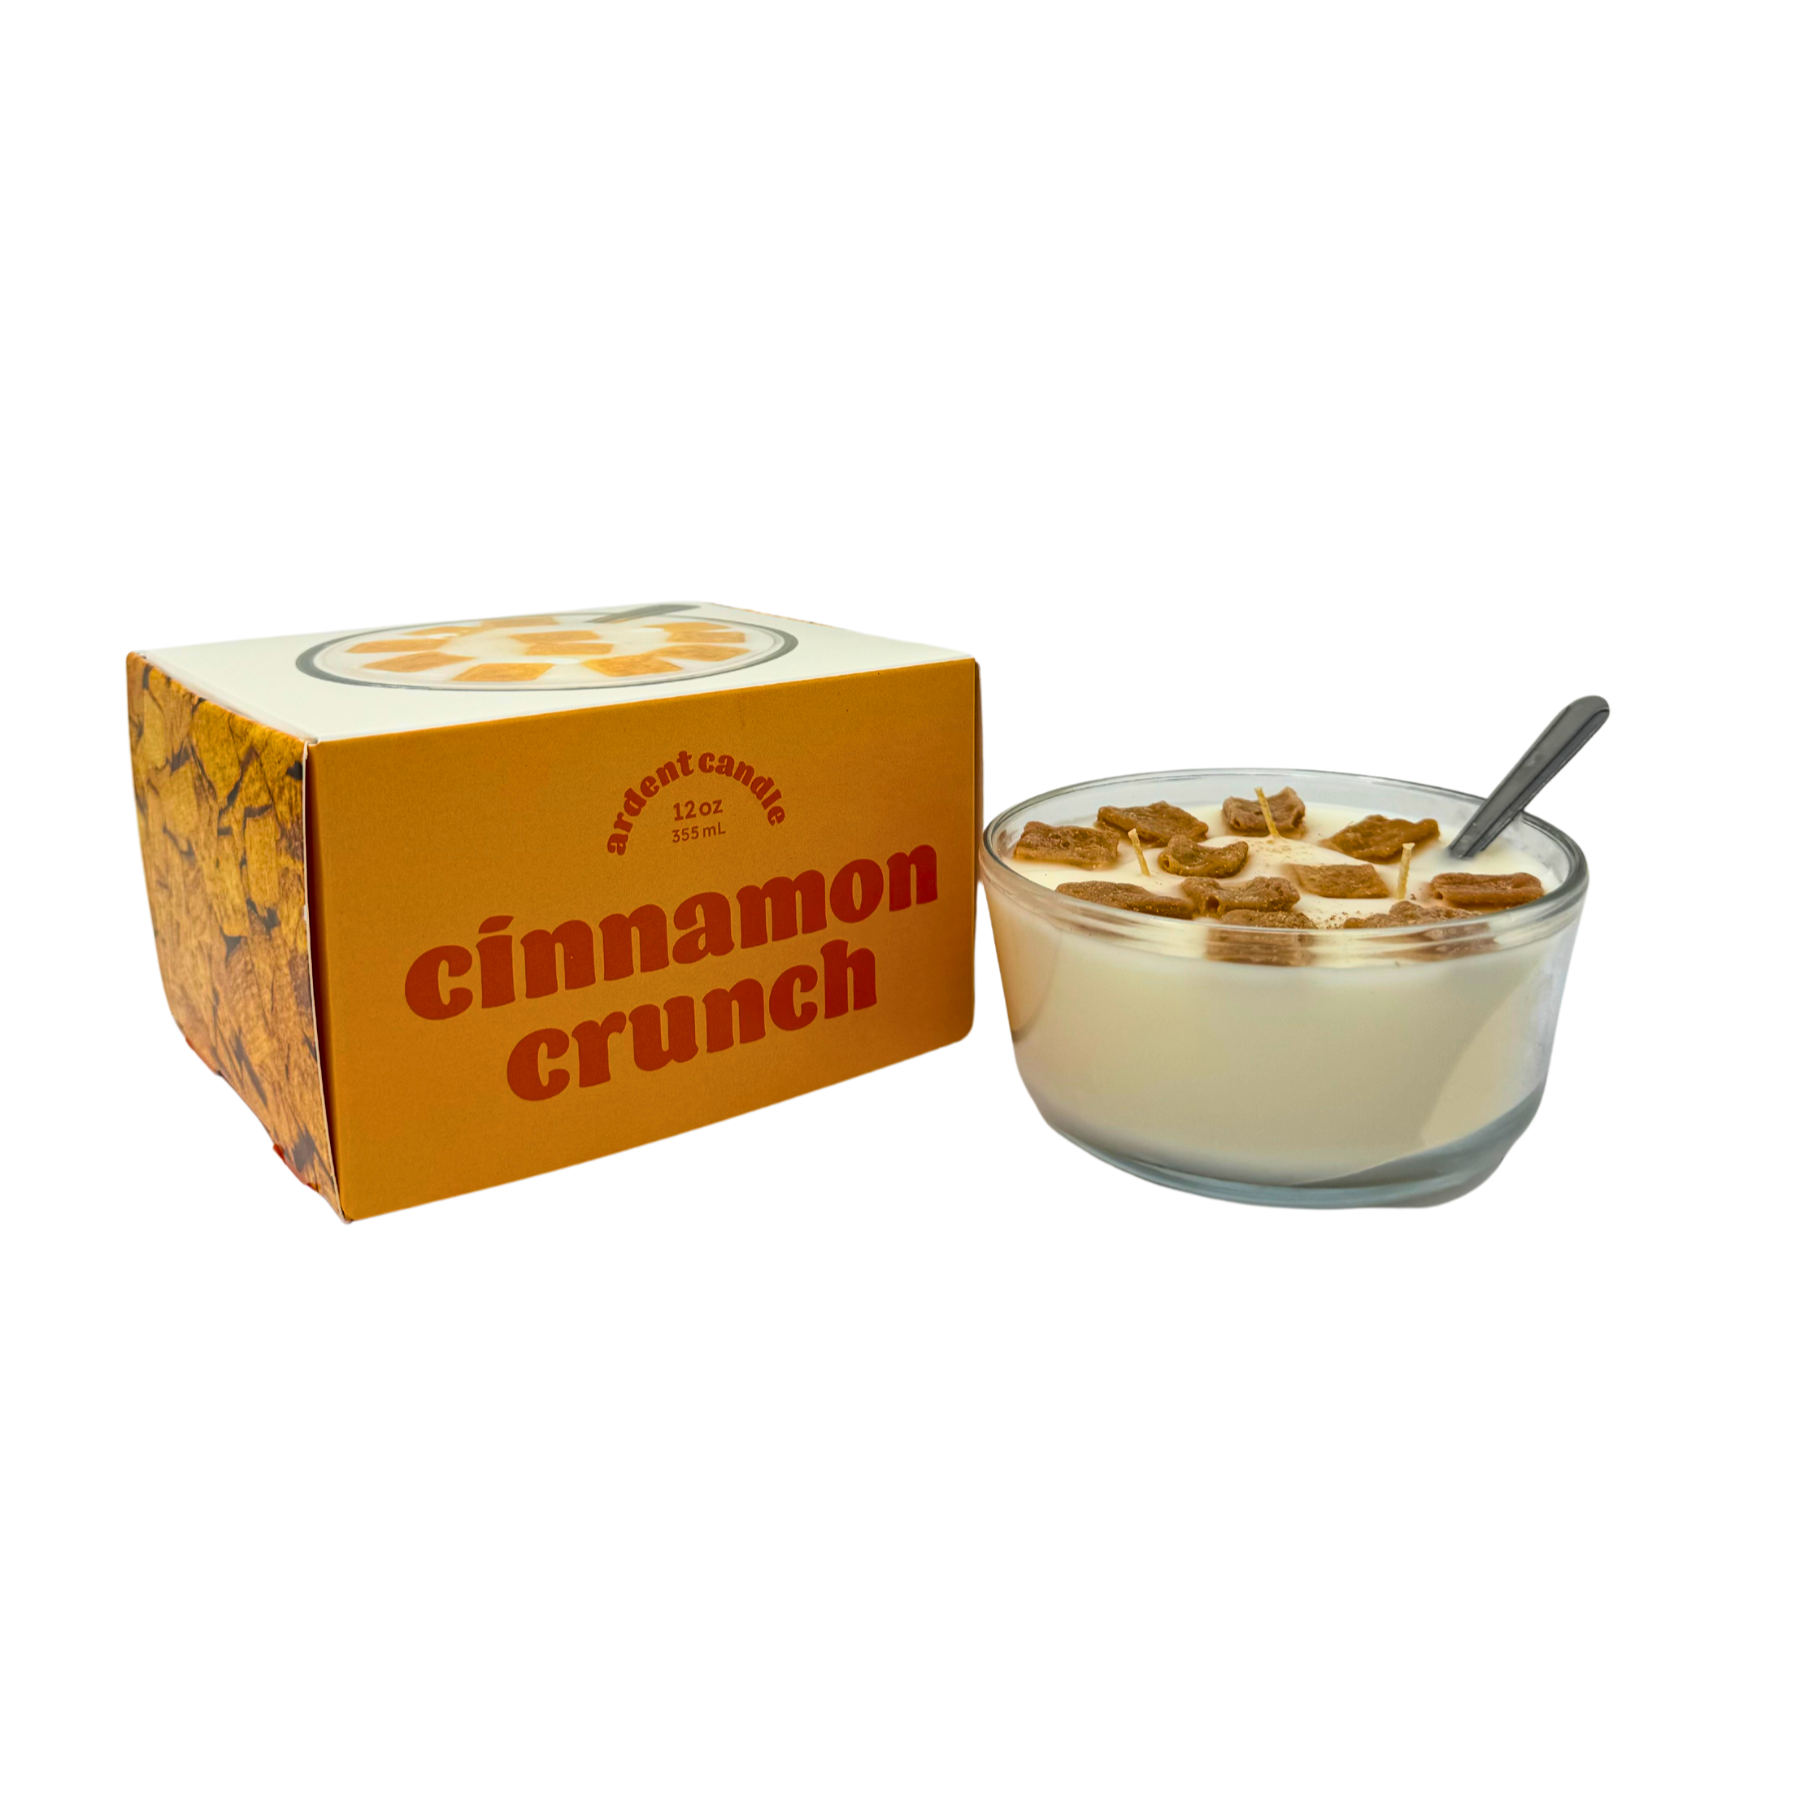 Cinnamon Crunch Cereal Bowl Candle